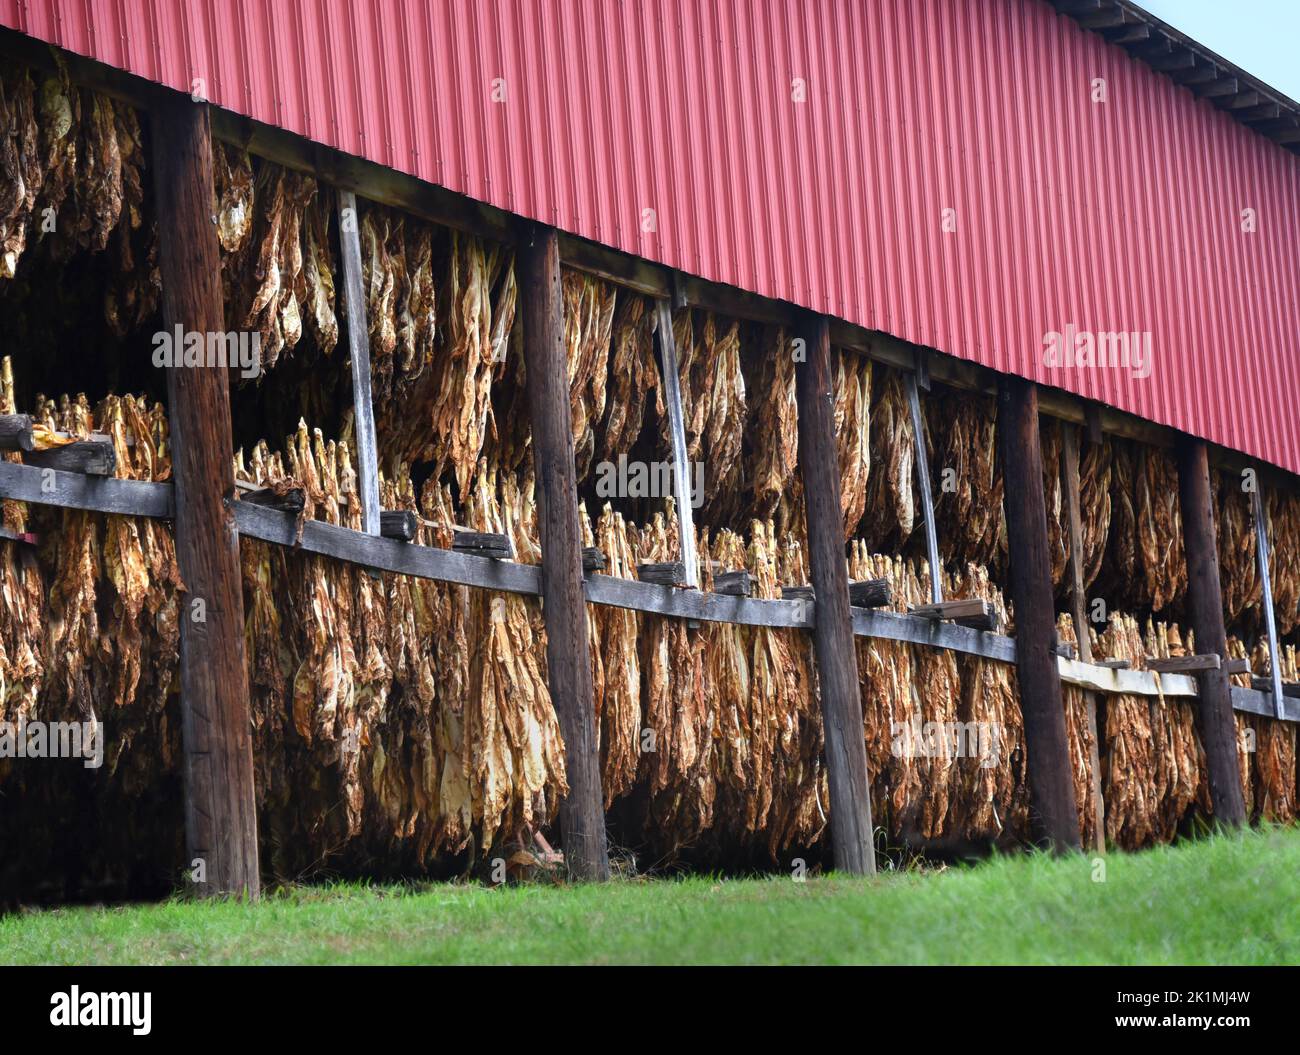 Tobacco crop hangs, upside down, in a red metal barn.  Leaves are curing and drying. Stock Photo